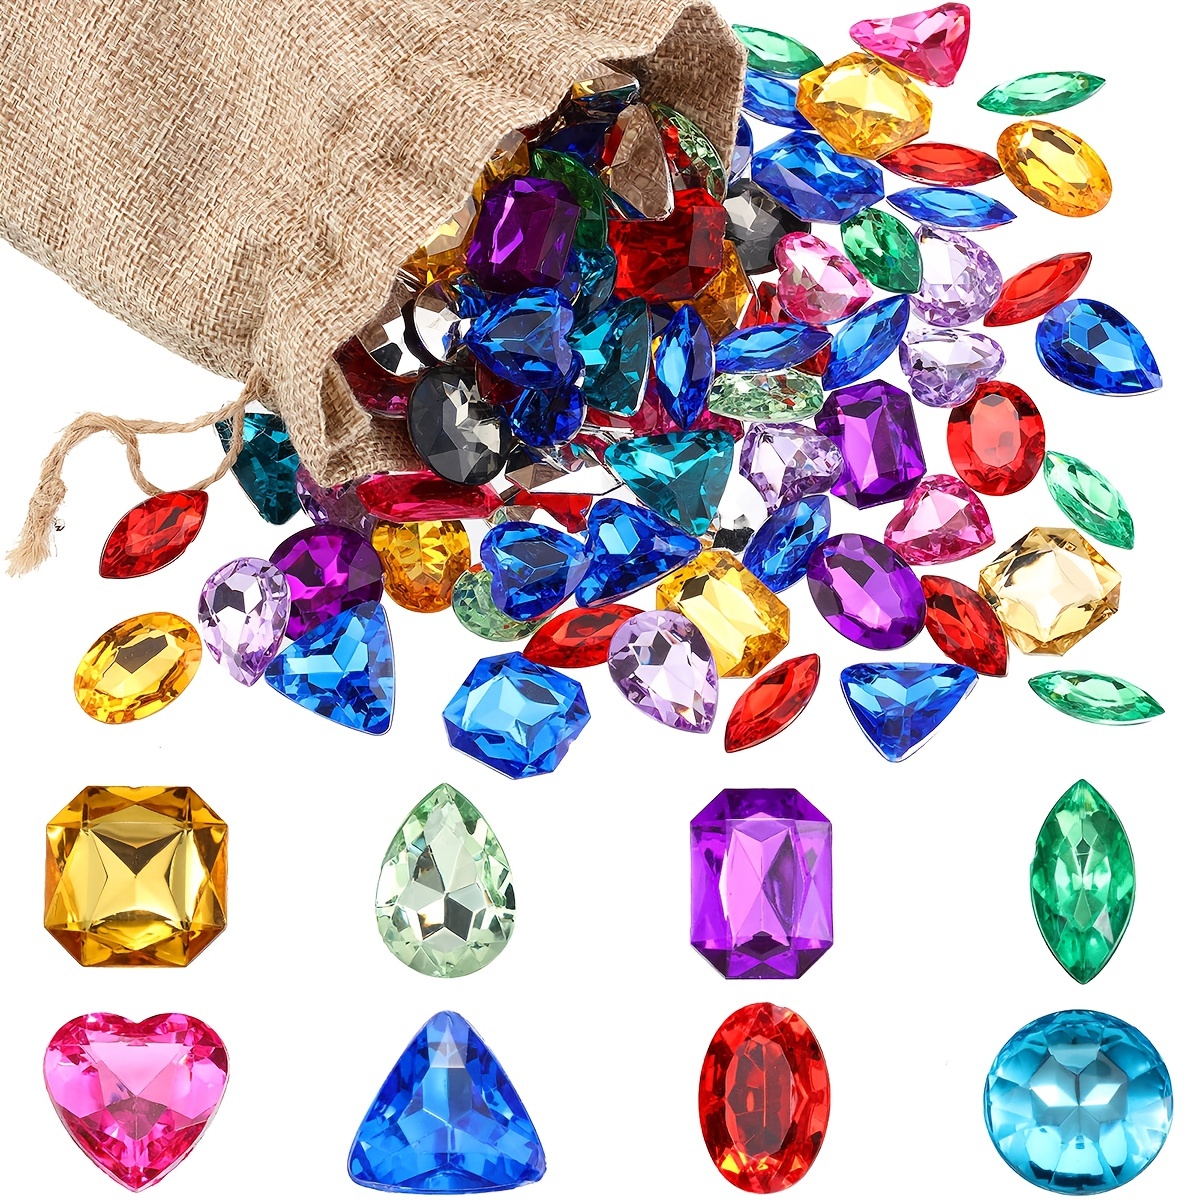 

80 Pieces Gems Pirate Treasure Jewels Fake Acrylic Gems Multicolor Bling Plastic With A Drawstring Bag For Party Table Decorations Pirate Party Favors